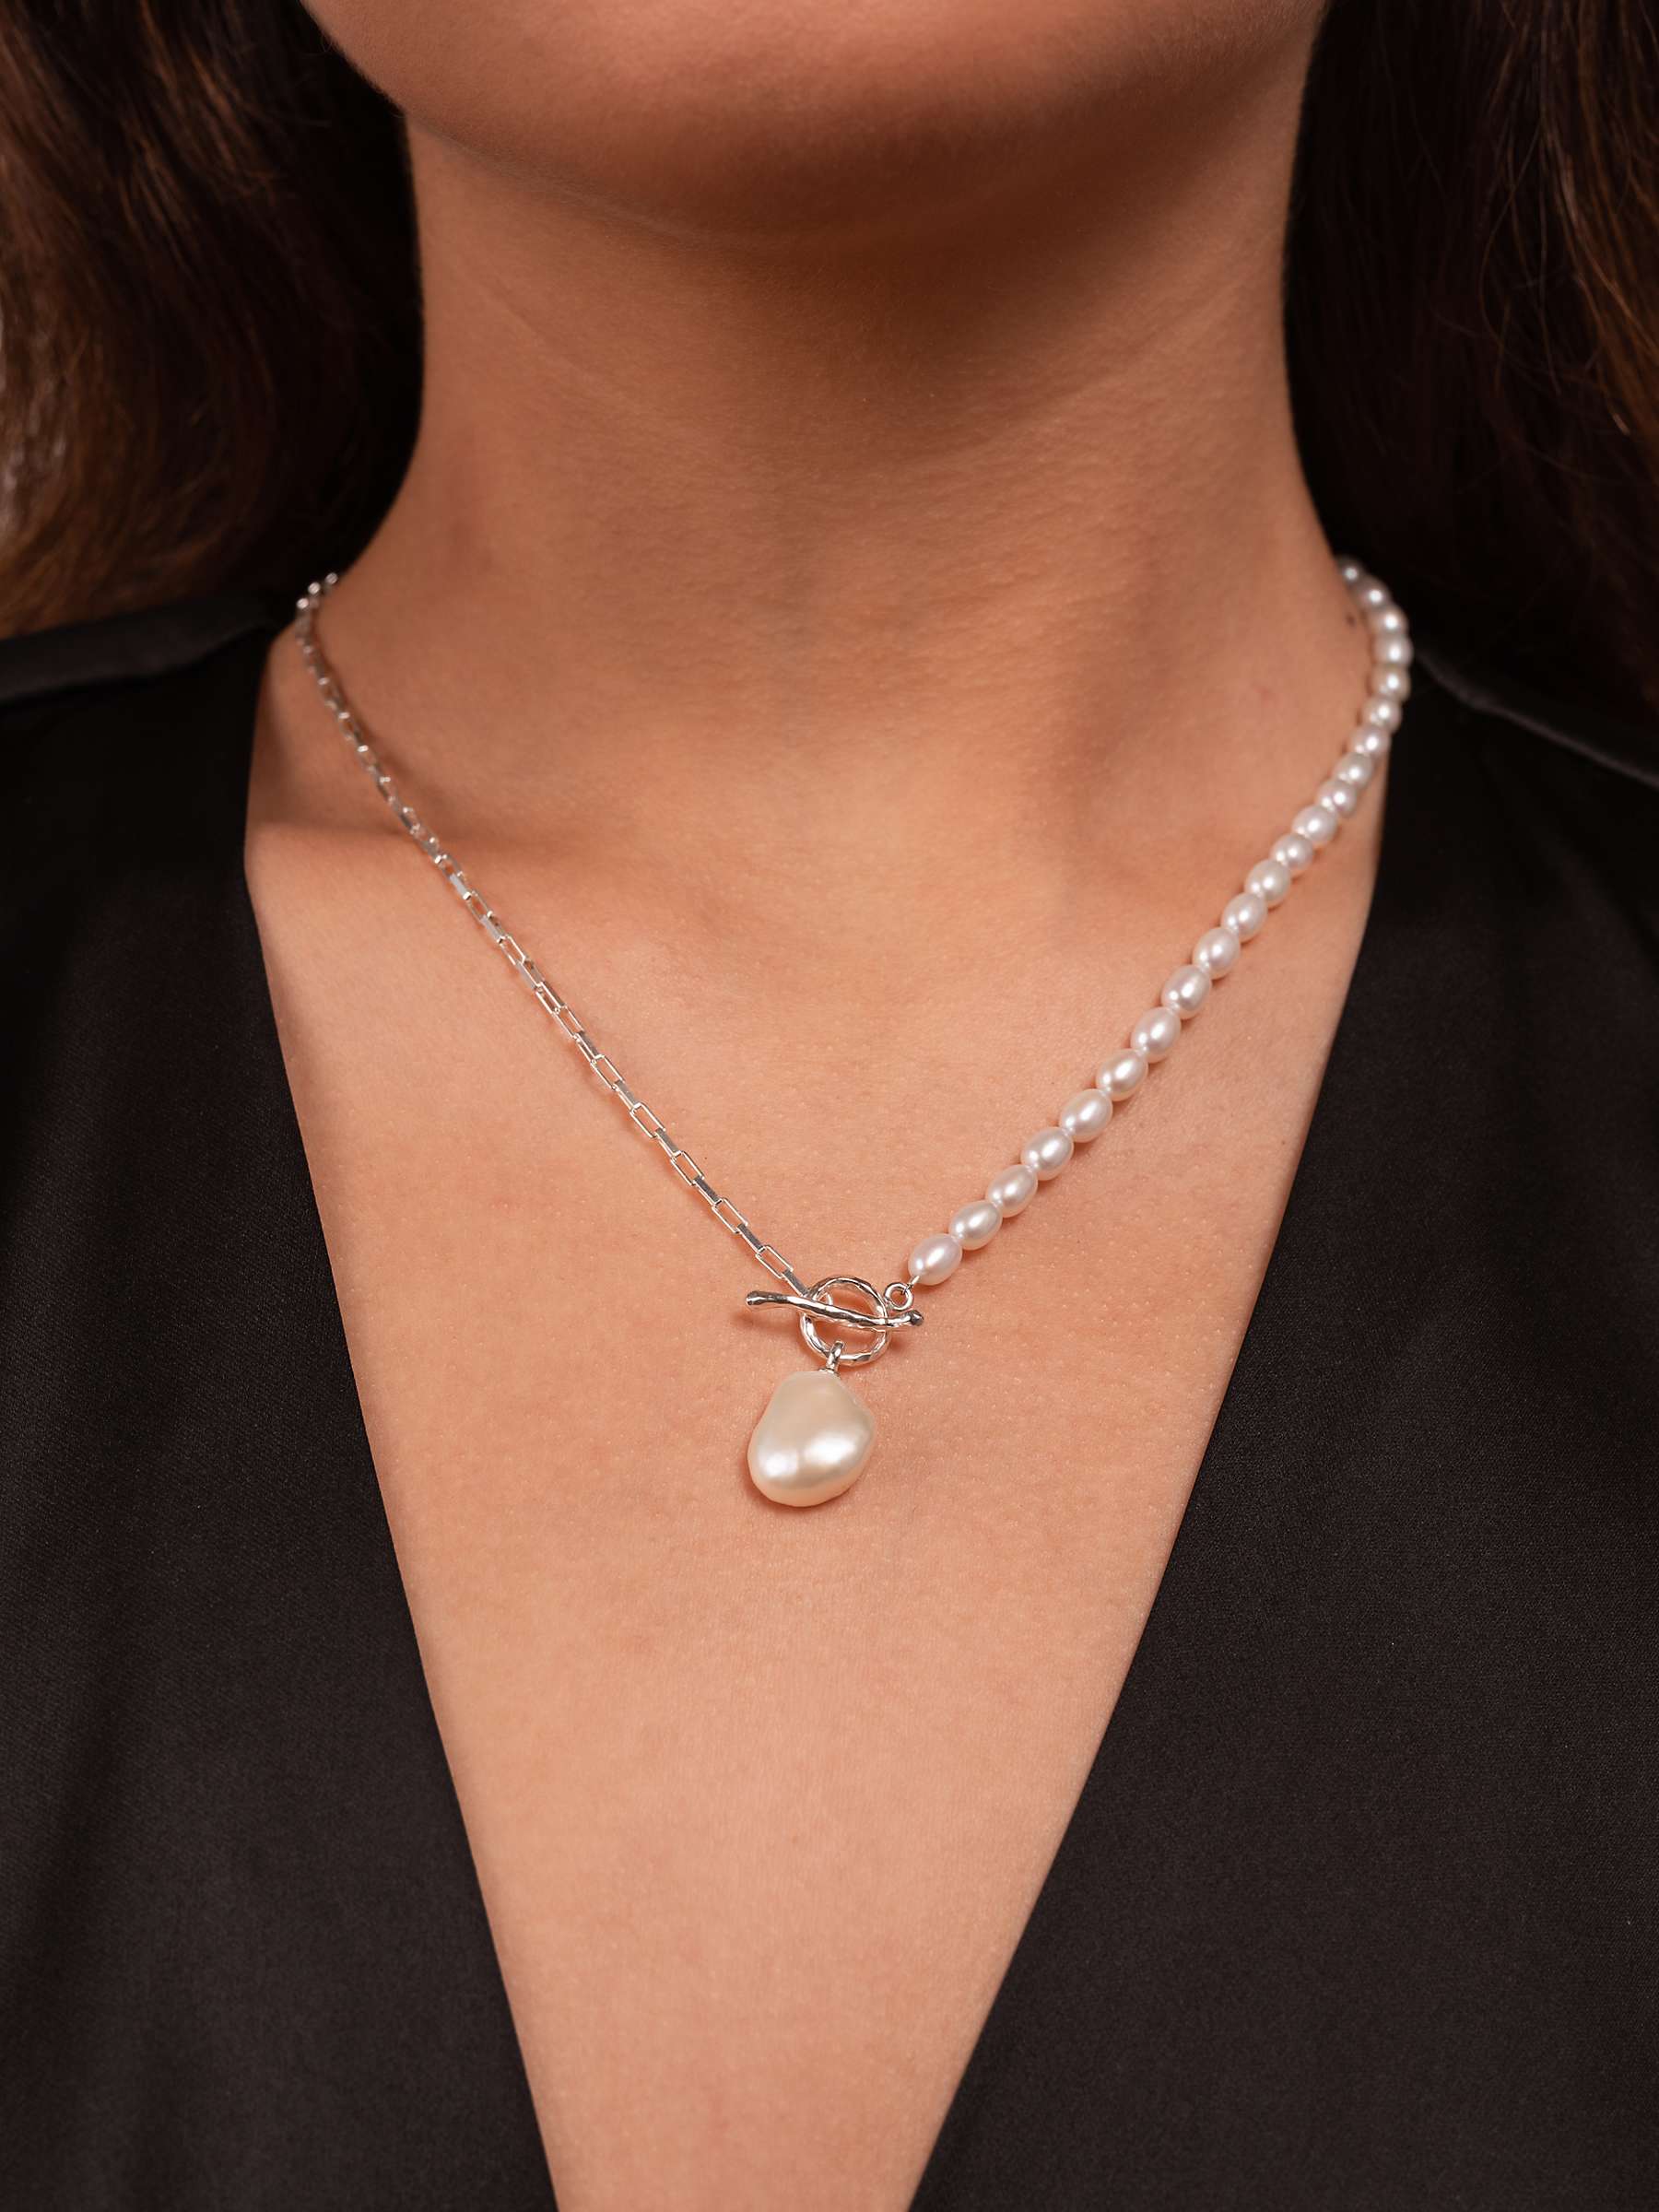 Buy Dower & Hall Luna Keshi Pearl and Chain Necklace, Silver/White Online at johnlewis.com